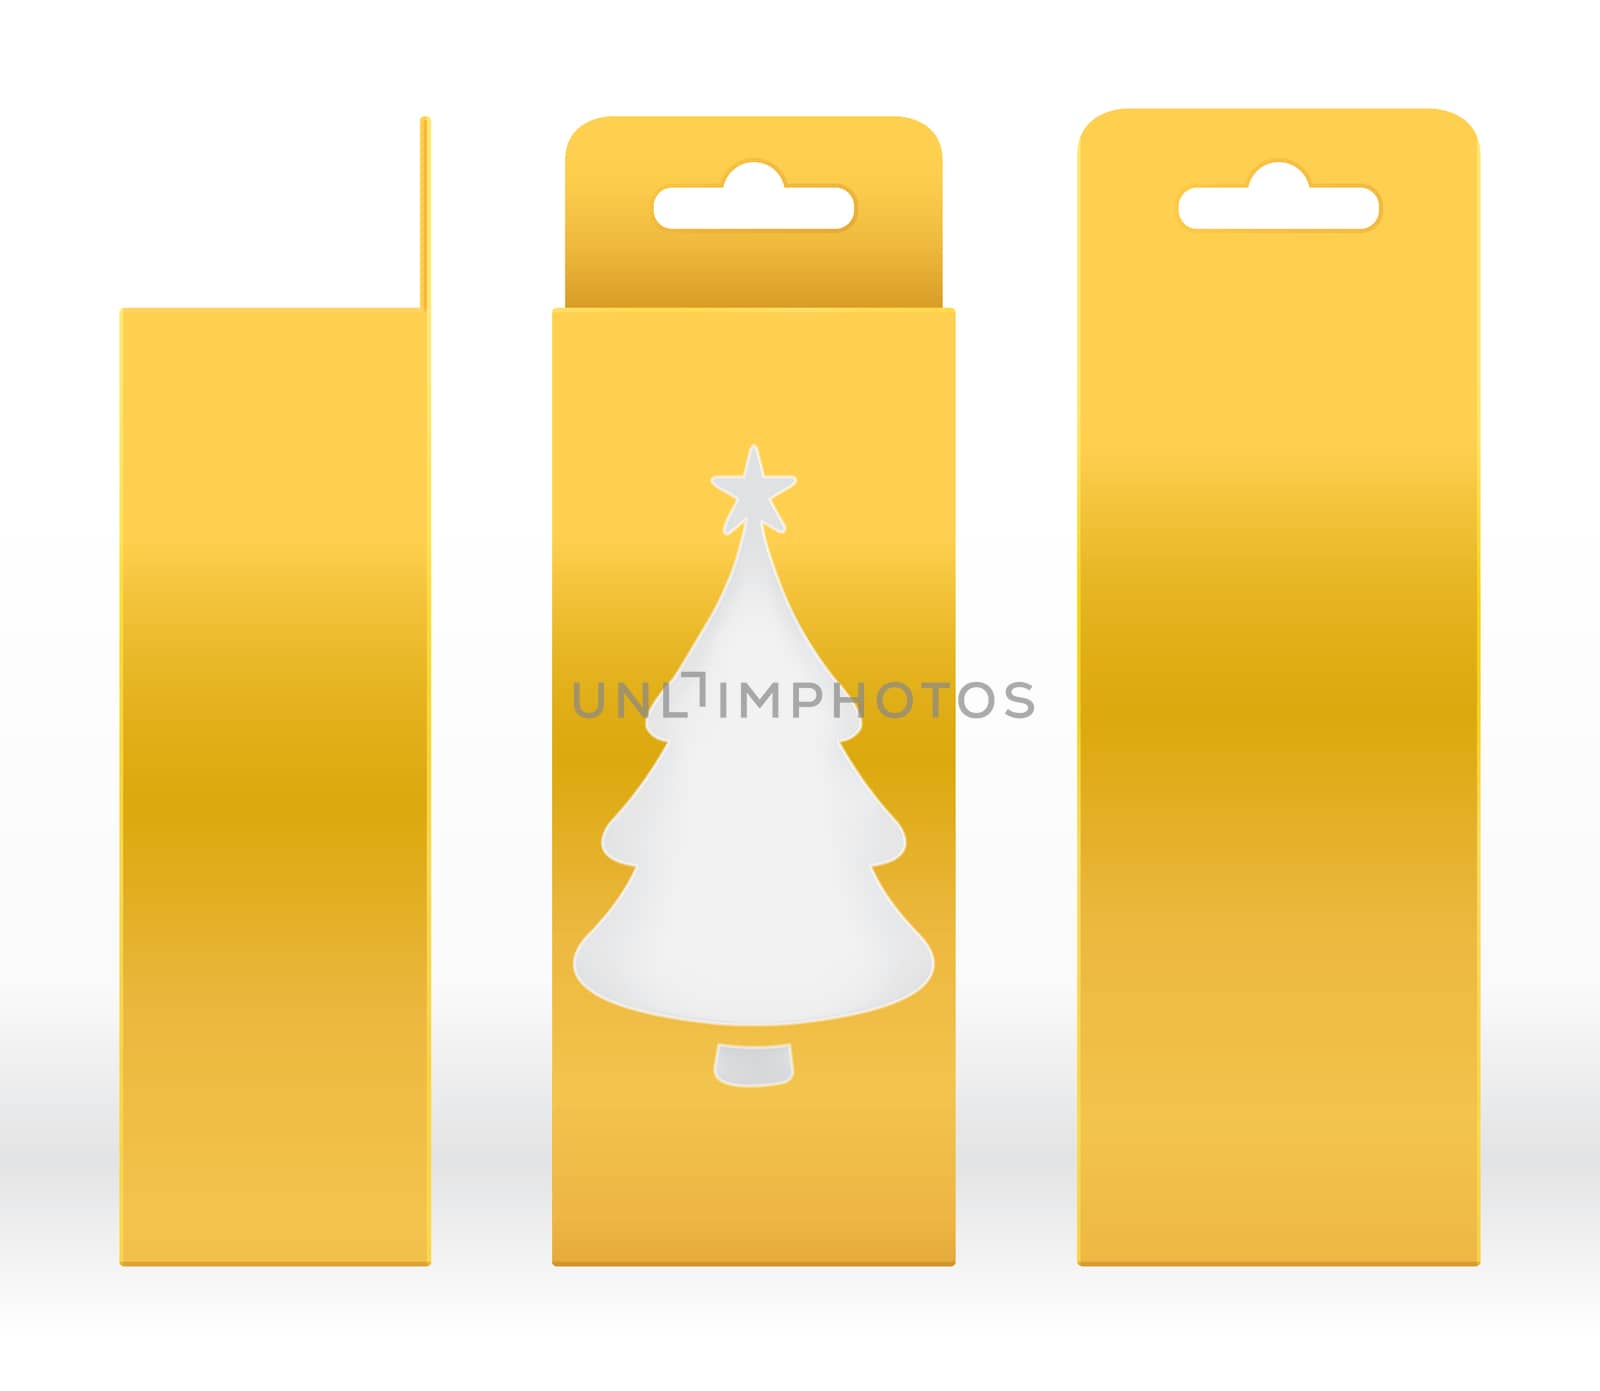 Hanging Box Gold window Christmas tree shape cut out Packaging Template blank. Luxury Empty Box Golden Template for design product package gift box, Gold Box packaging paper kraft cardboard package by cgdeaw